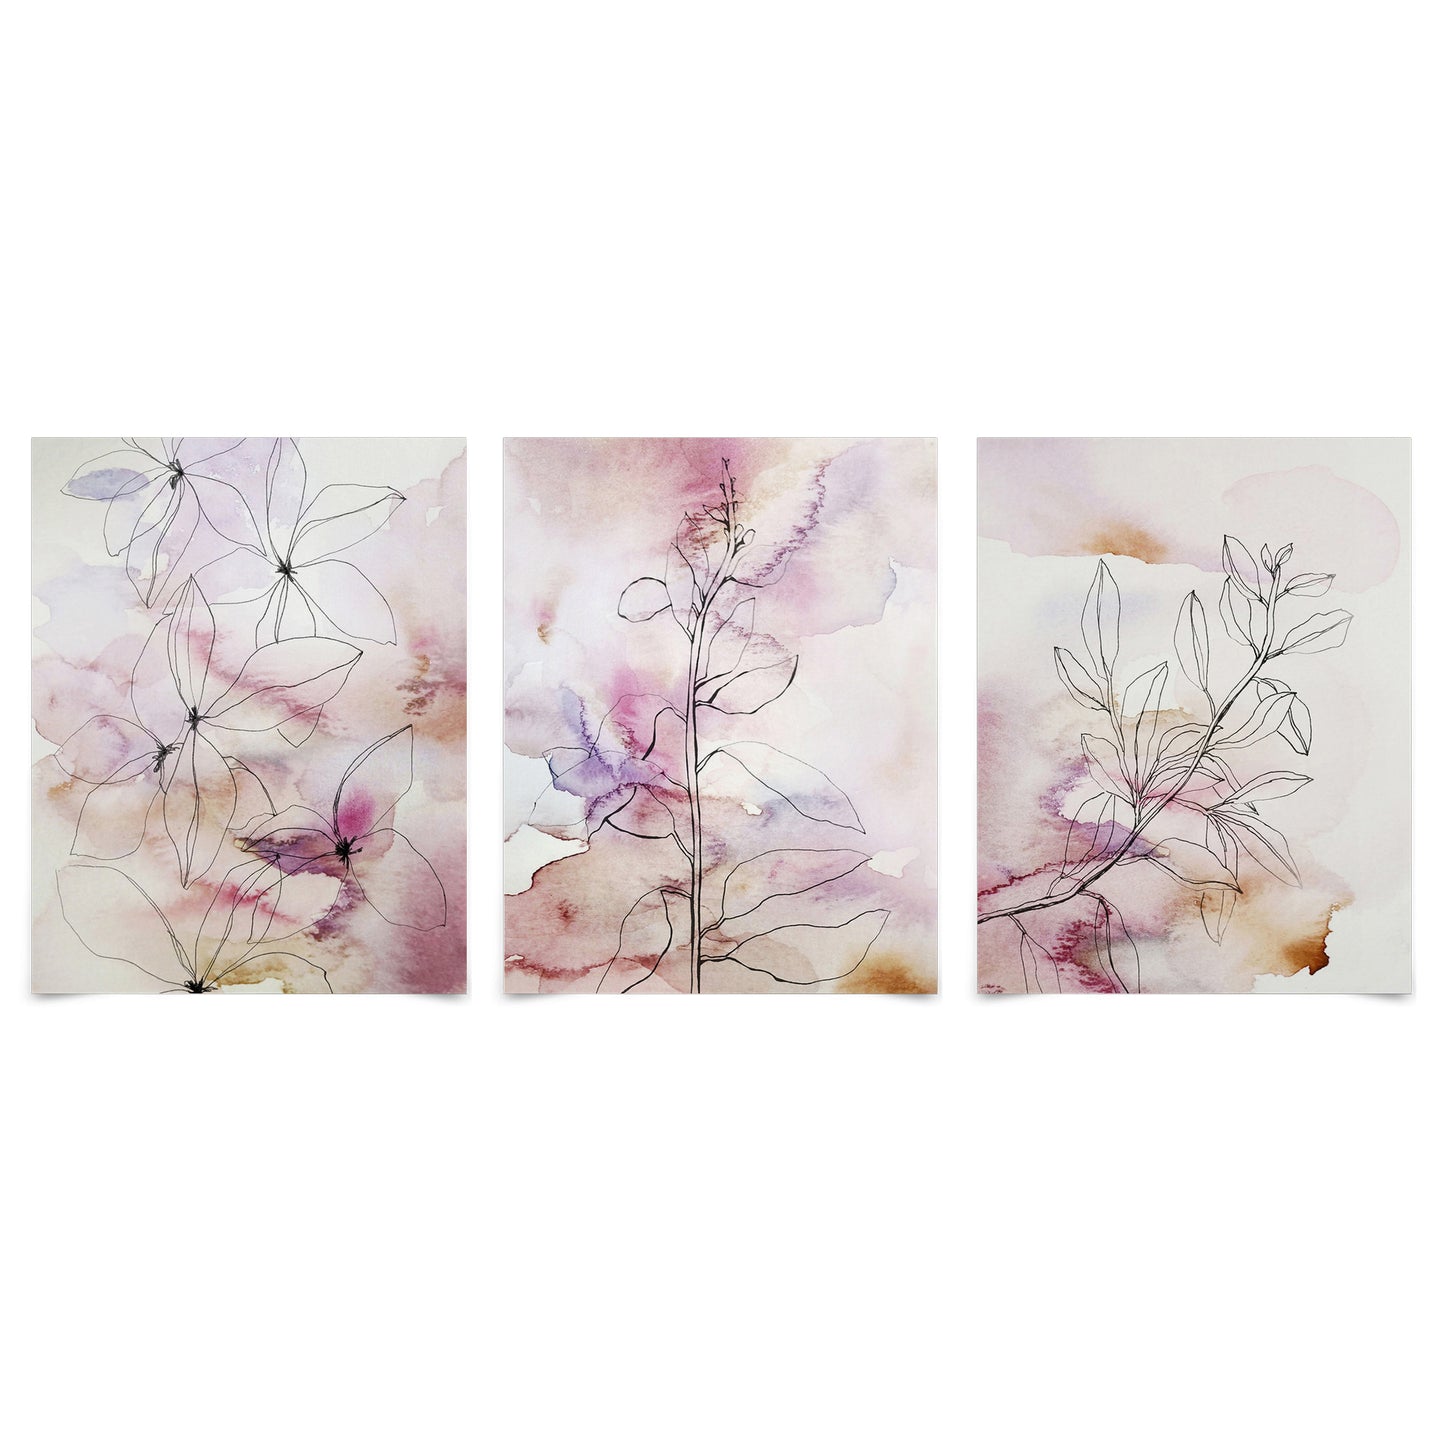 (Set of 3) Triptych Wall Art Watercolor Plant Sketches by Hope Bainbridge - Poster Print